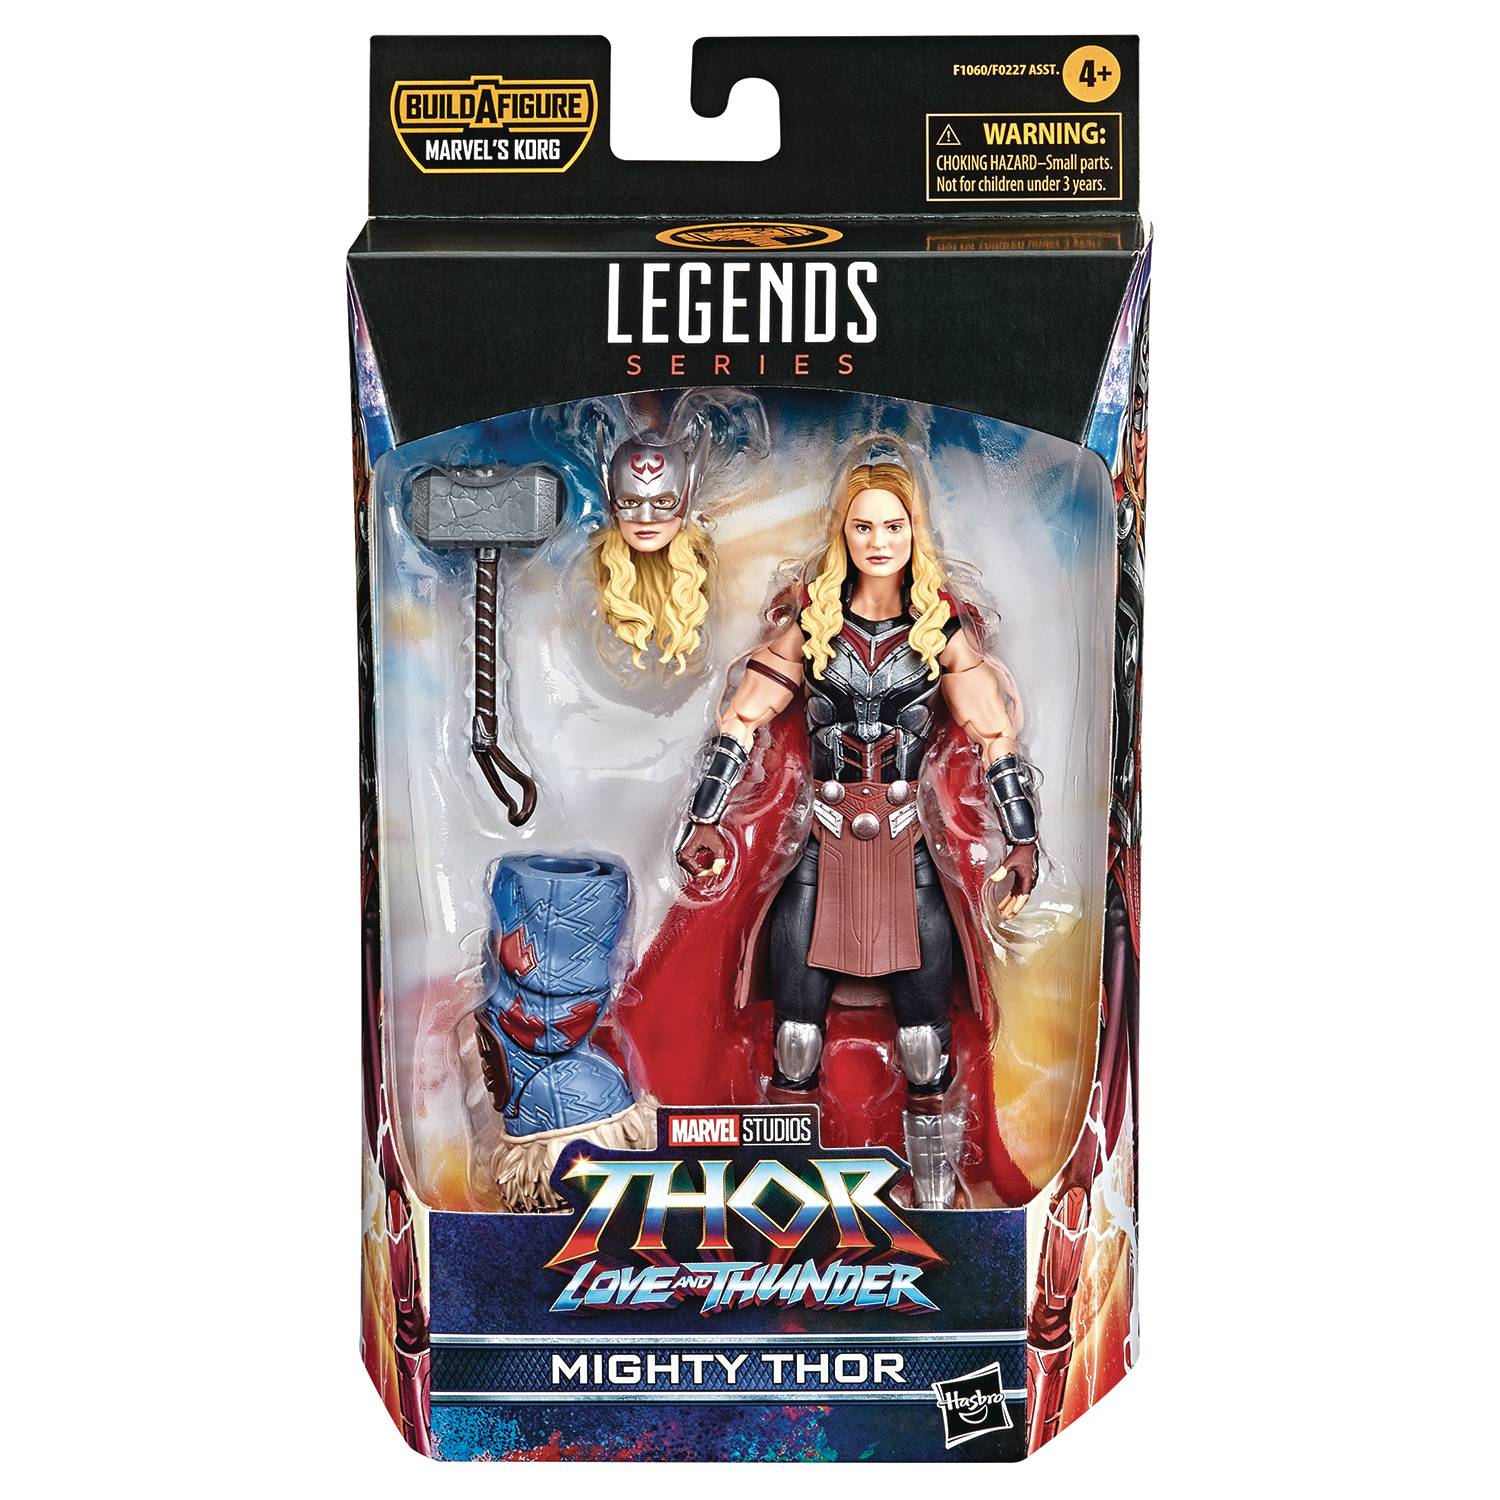 THOR MOVIE LEGENDS 6IN MIGHTY THOR AF CS